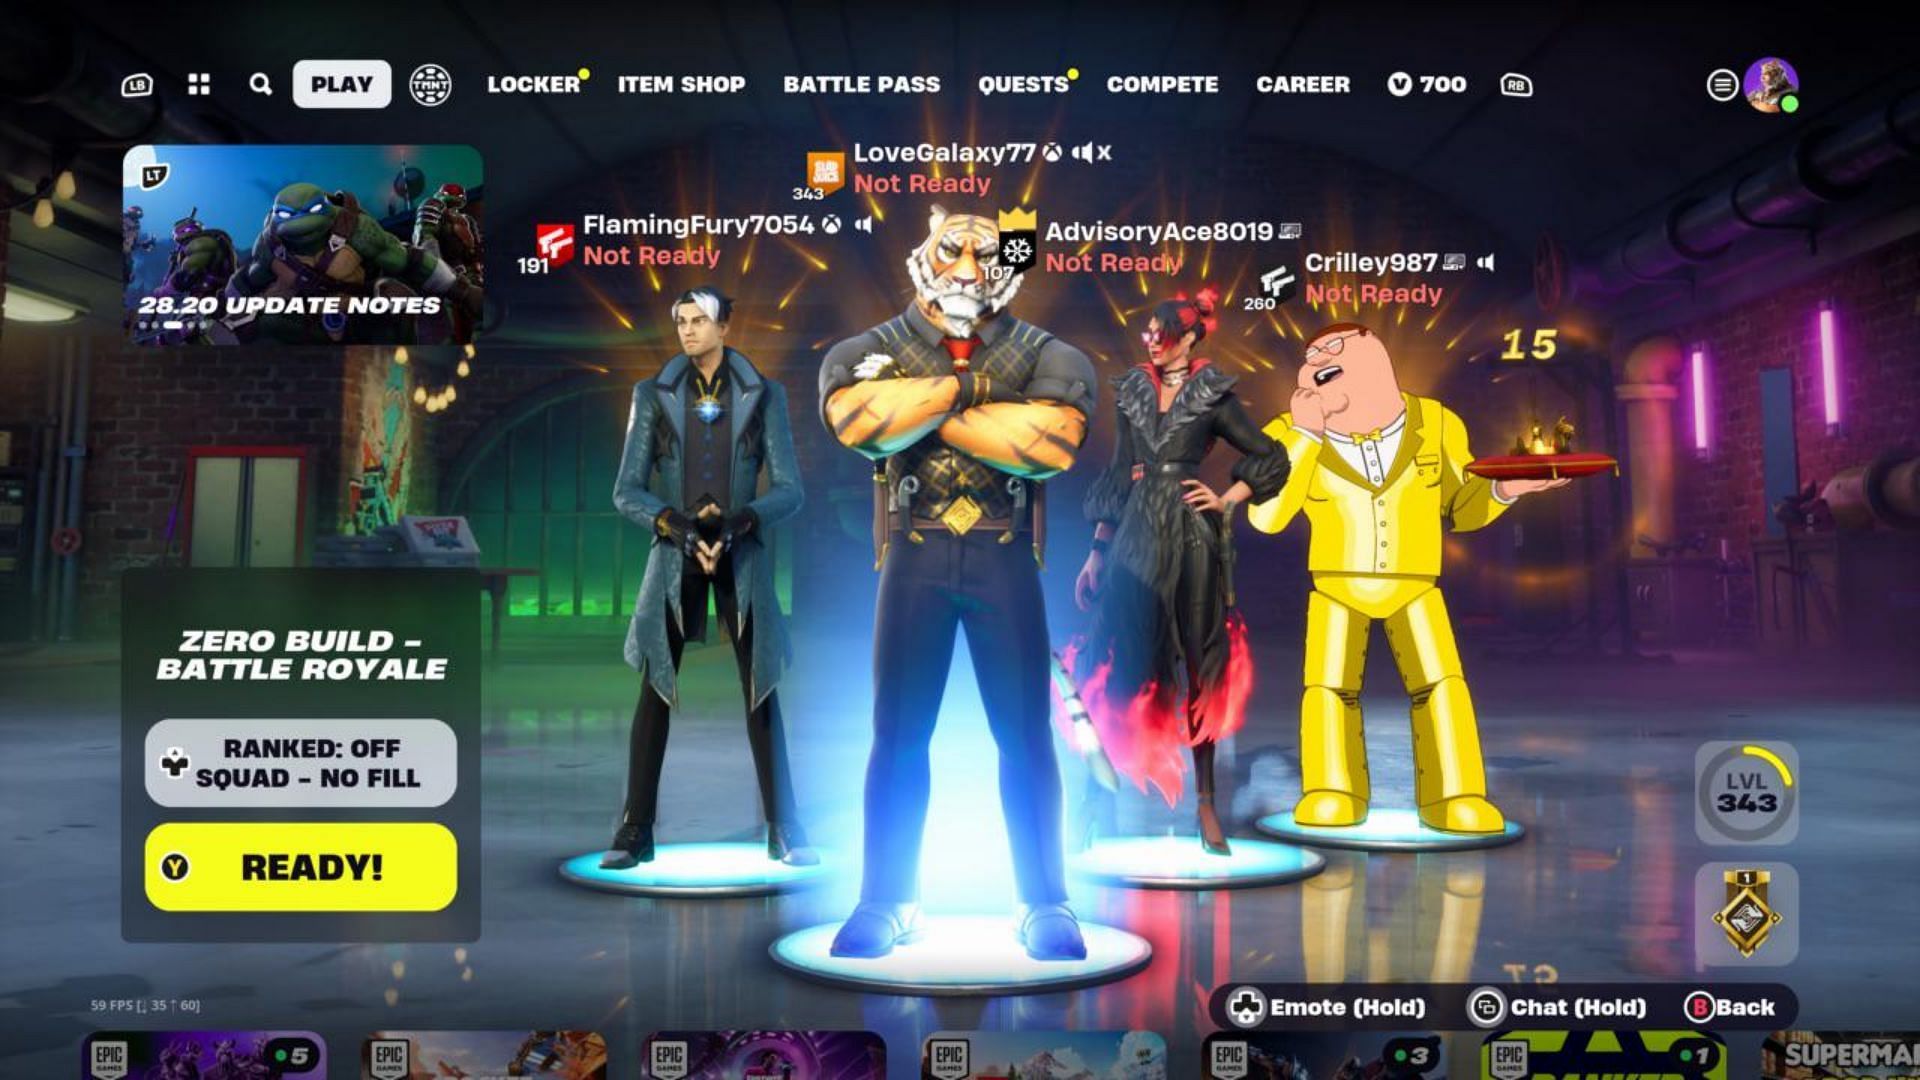 Fortnite players win match dressed as Society Bosses, community divided in opinion about the truth